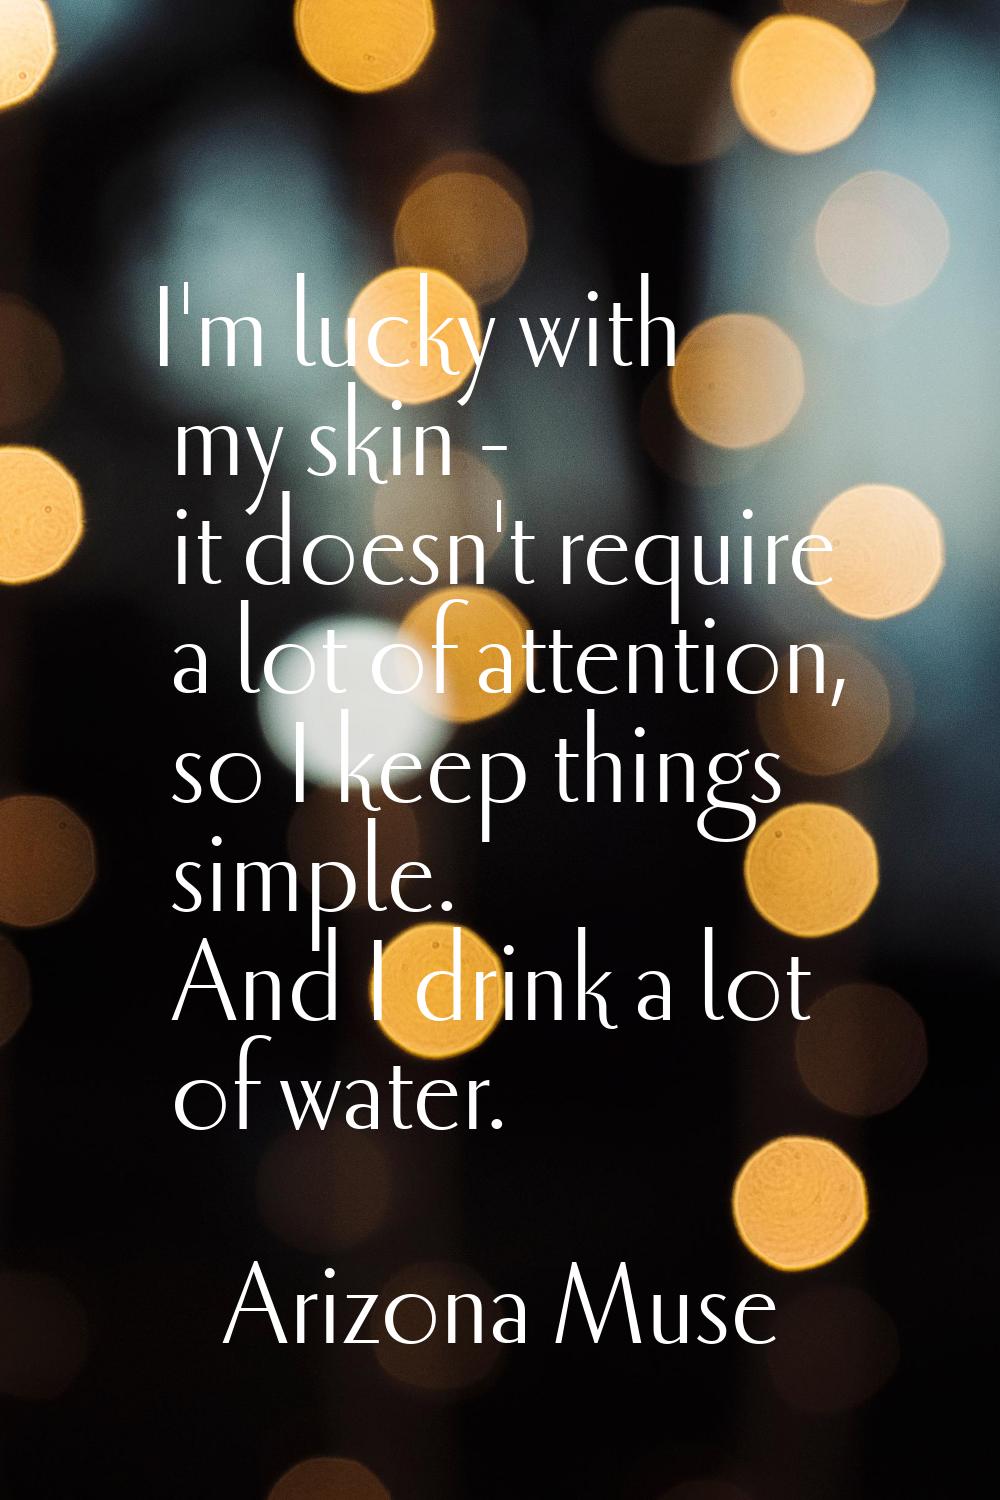 I'm lucky with my skin - it doesn't require a lot of attention, so I keep things simple. And I drin